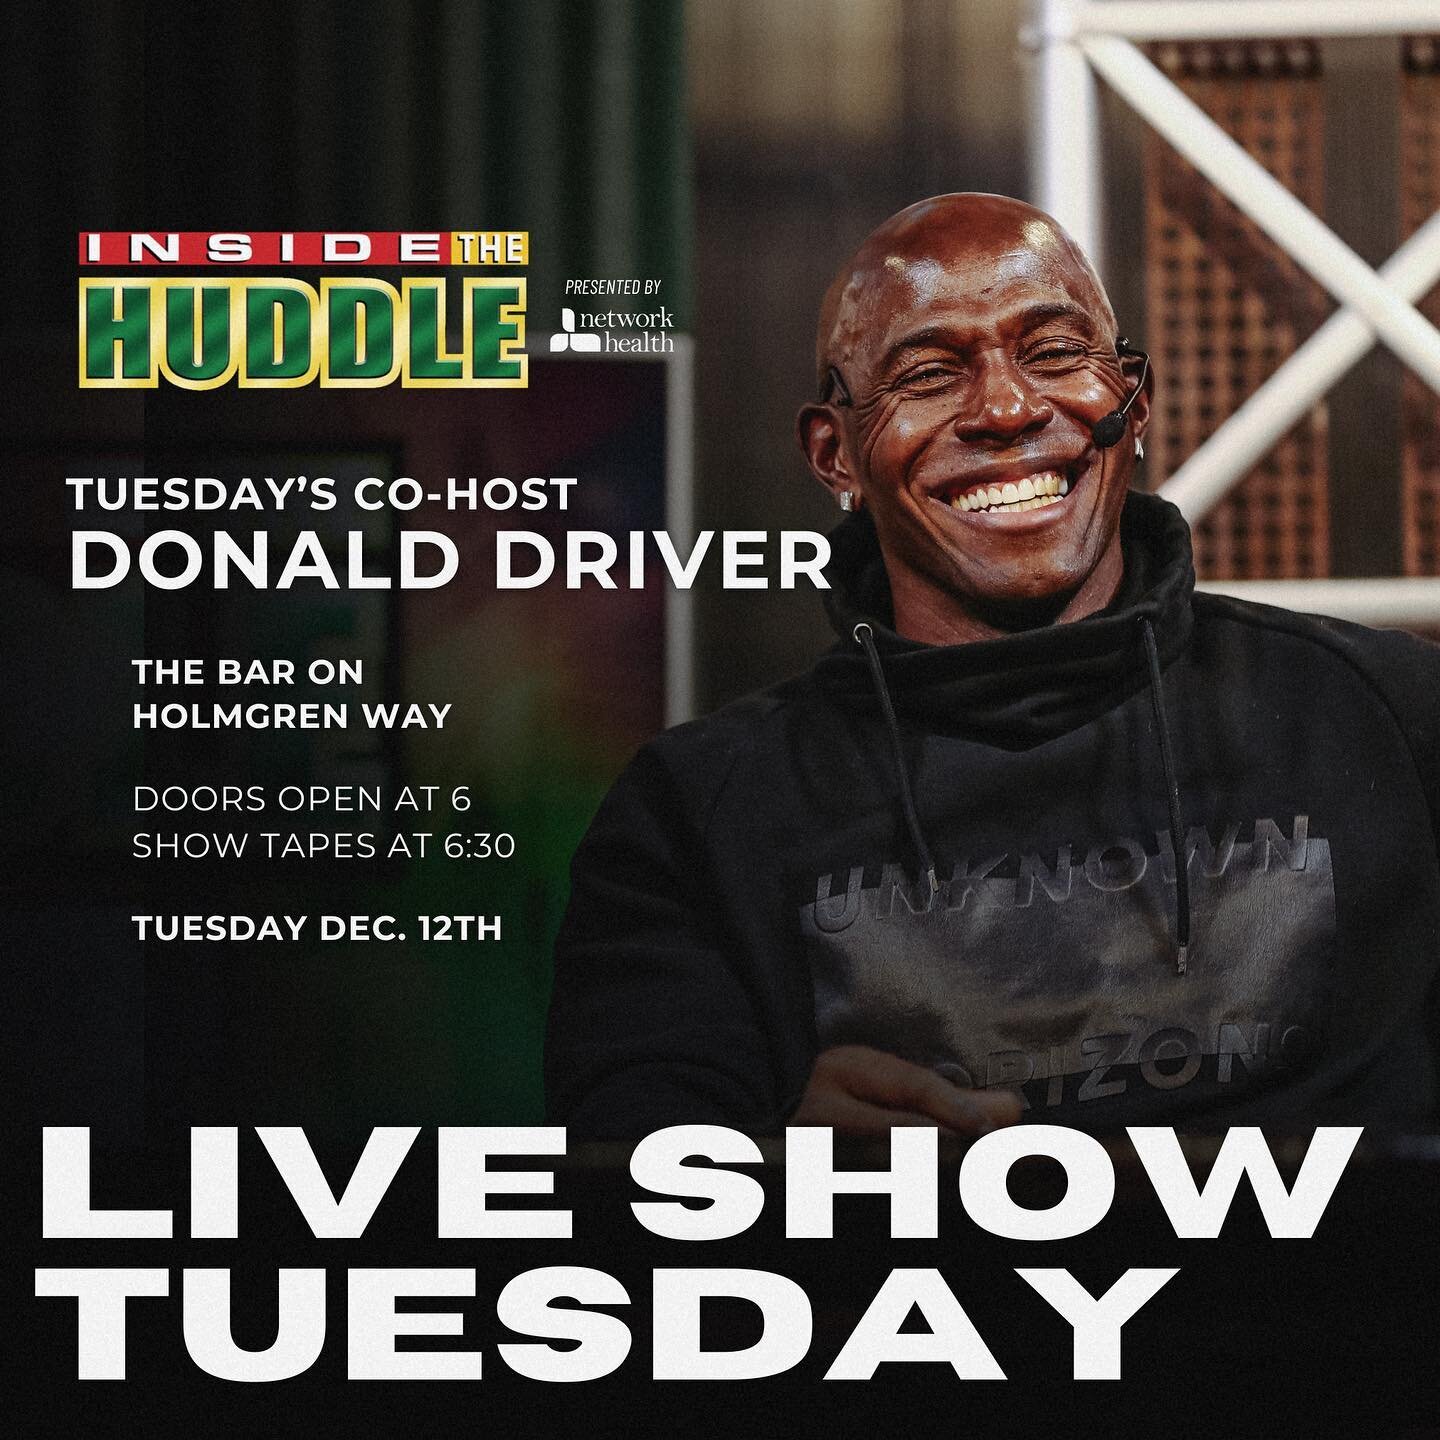 Get excited‼️ Next Tuesday, Green Bay&rsquo;s all-time leading receiver, @donald_driver80 will be back in town to join the show 🔥

Tuesday&rsquo;s show will be BUSY! Make sure you arrive early to secure your spot. We can&rsquo;t wait to see you all 